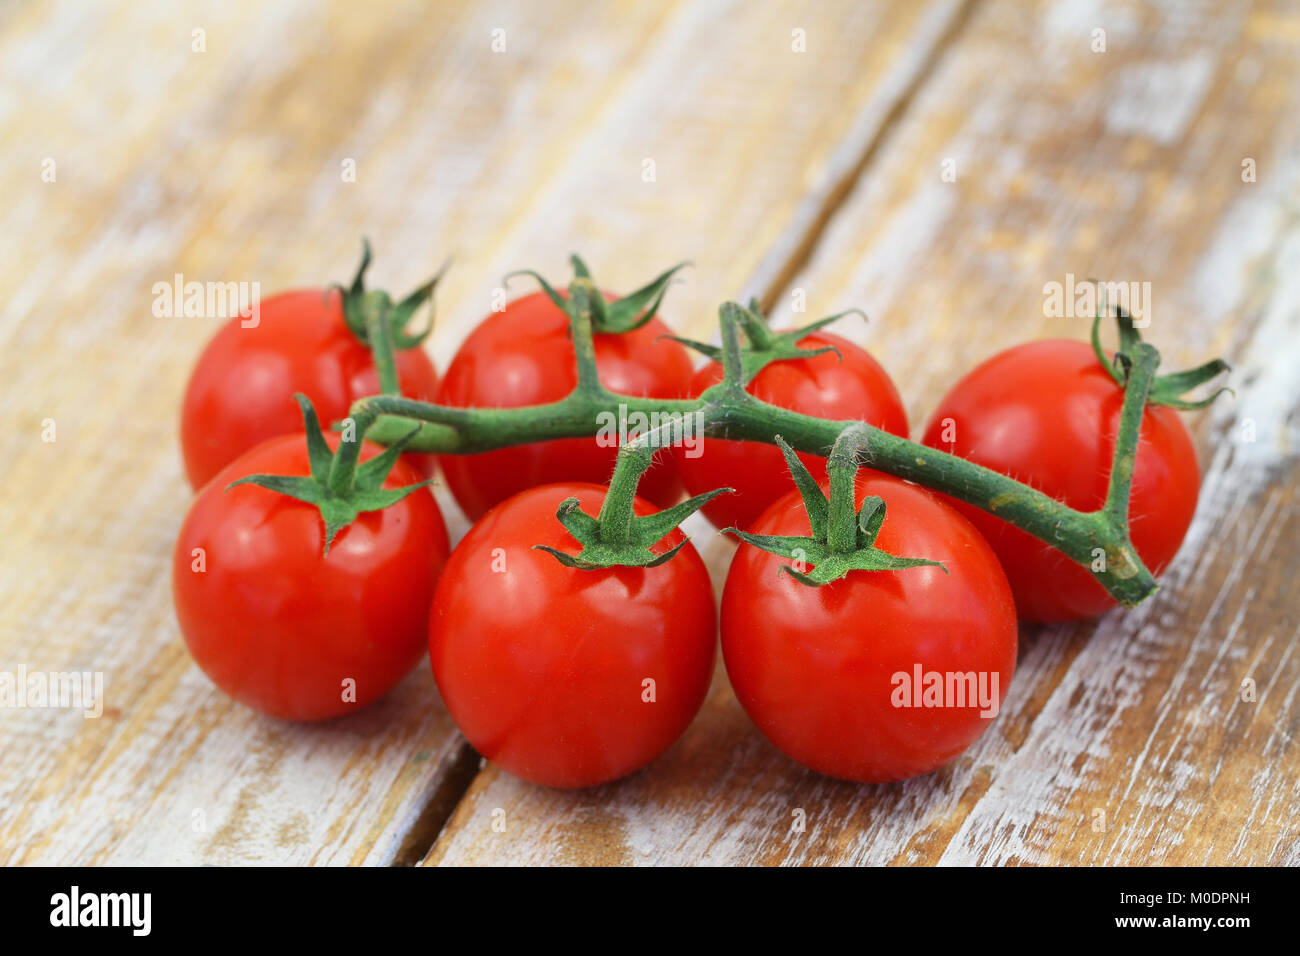 Ripe cherry tomatoes on rustic wooden surface, closeup Stock Photo